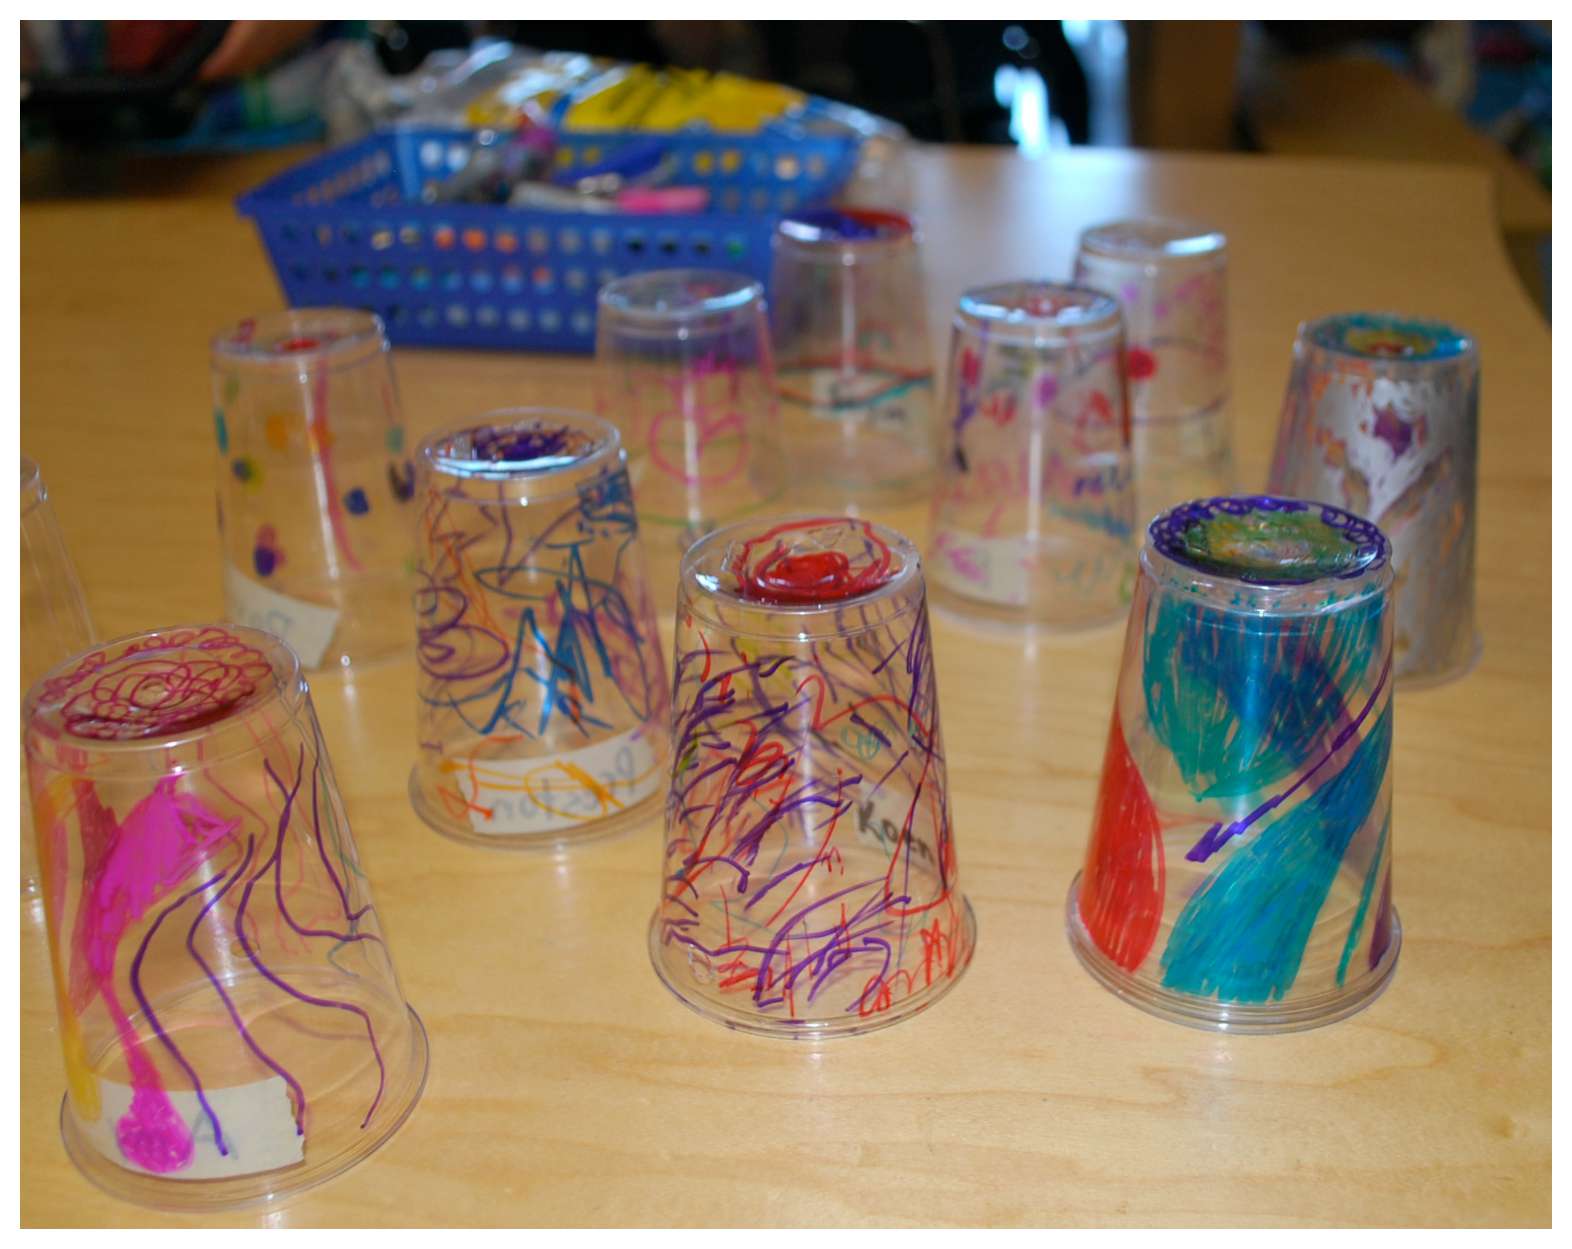 Chihuly art - kindergarten style - rubber boots and elf shoes